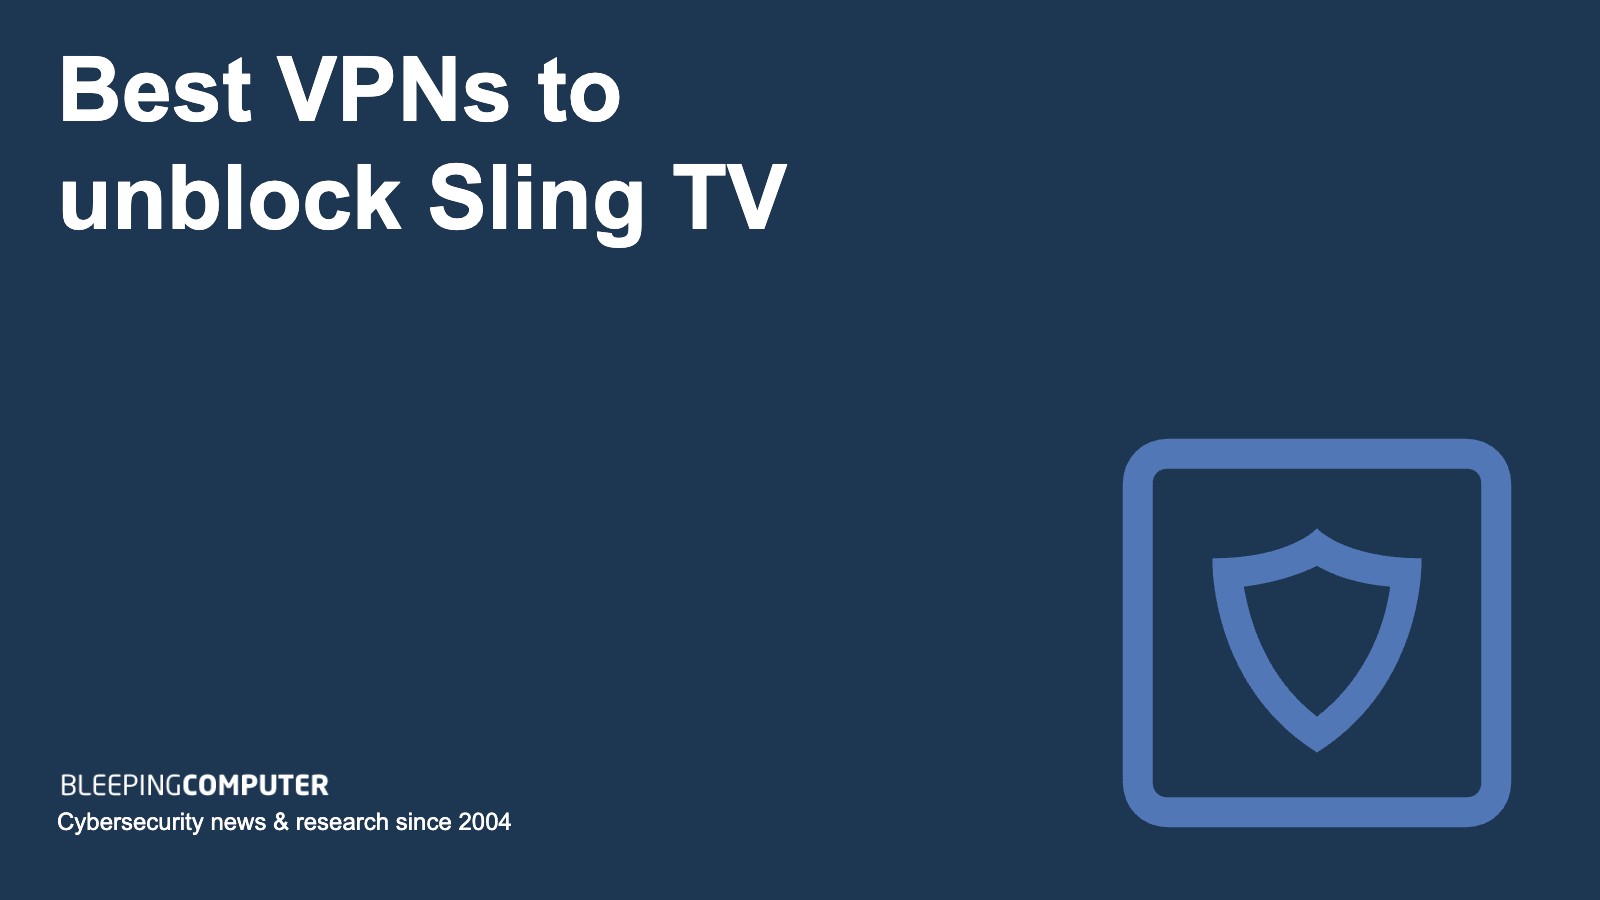 Best VPNs to unblock Sling TV from abroad